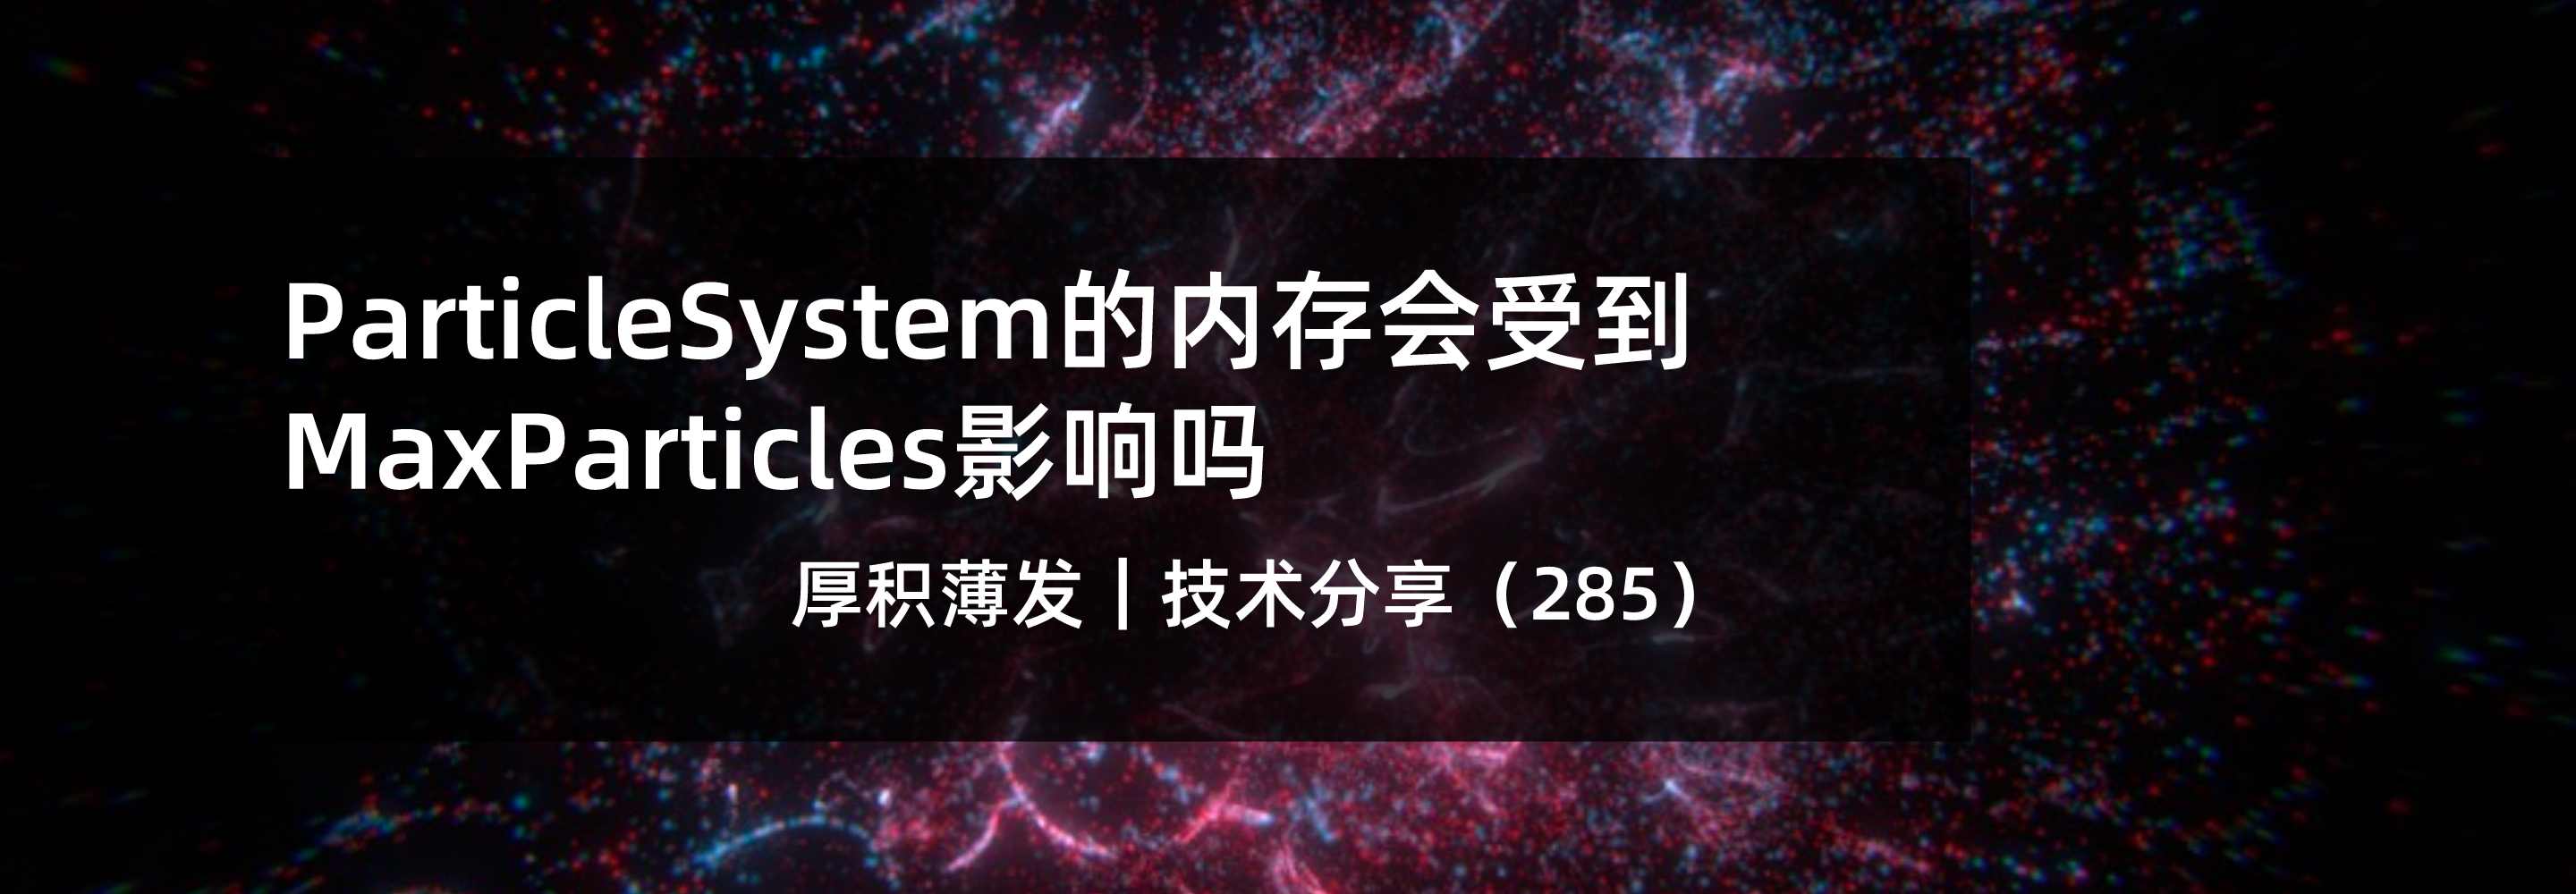 ParticleSystem的内存会受到MaxParticles影响吗